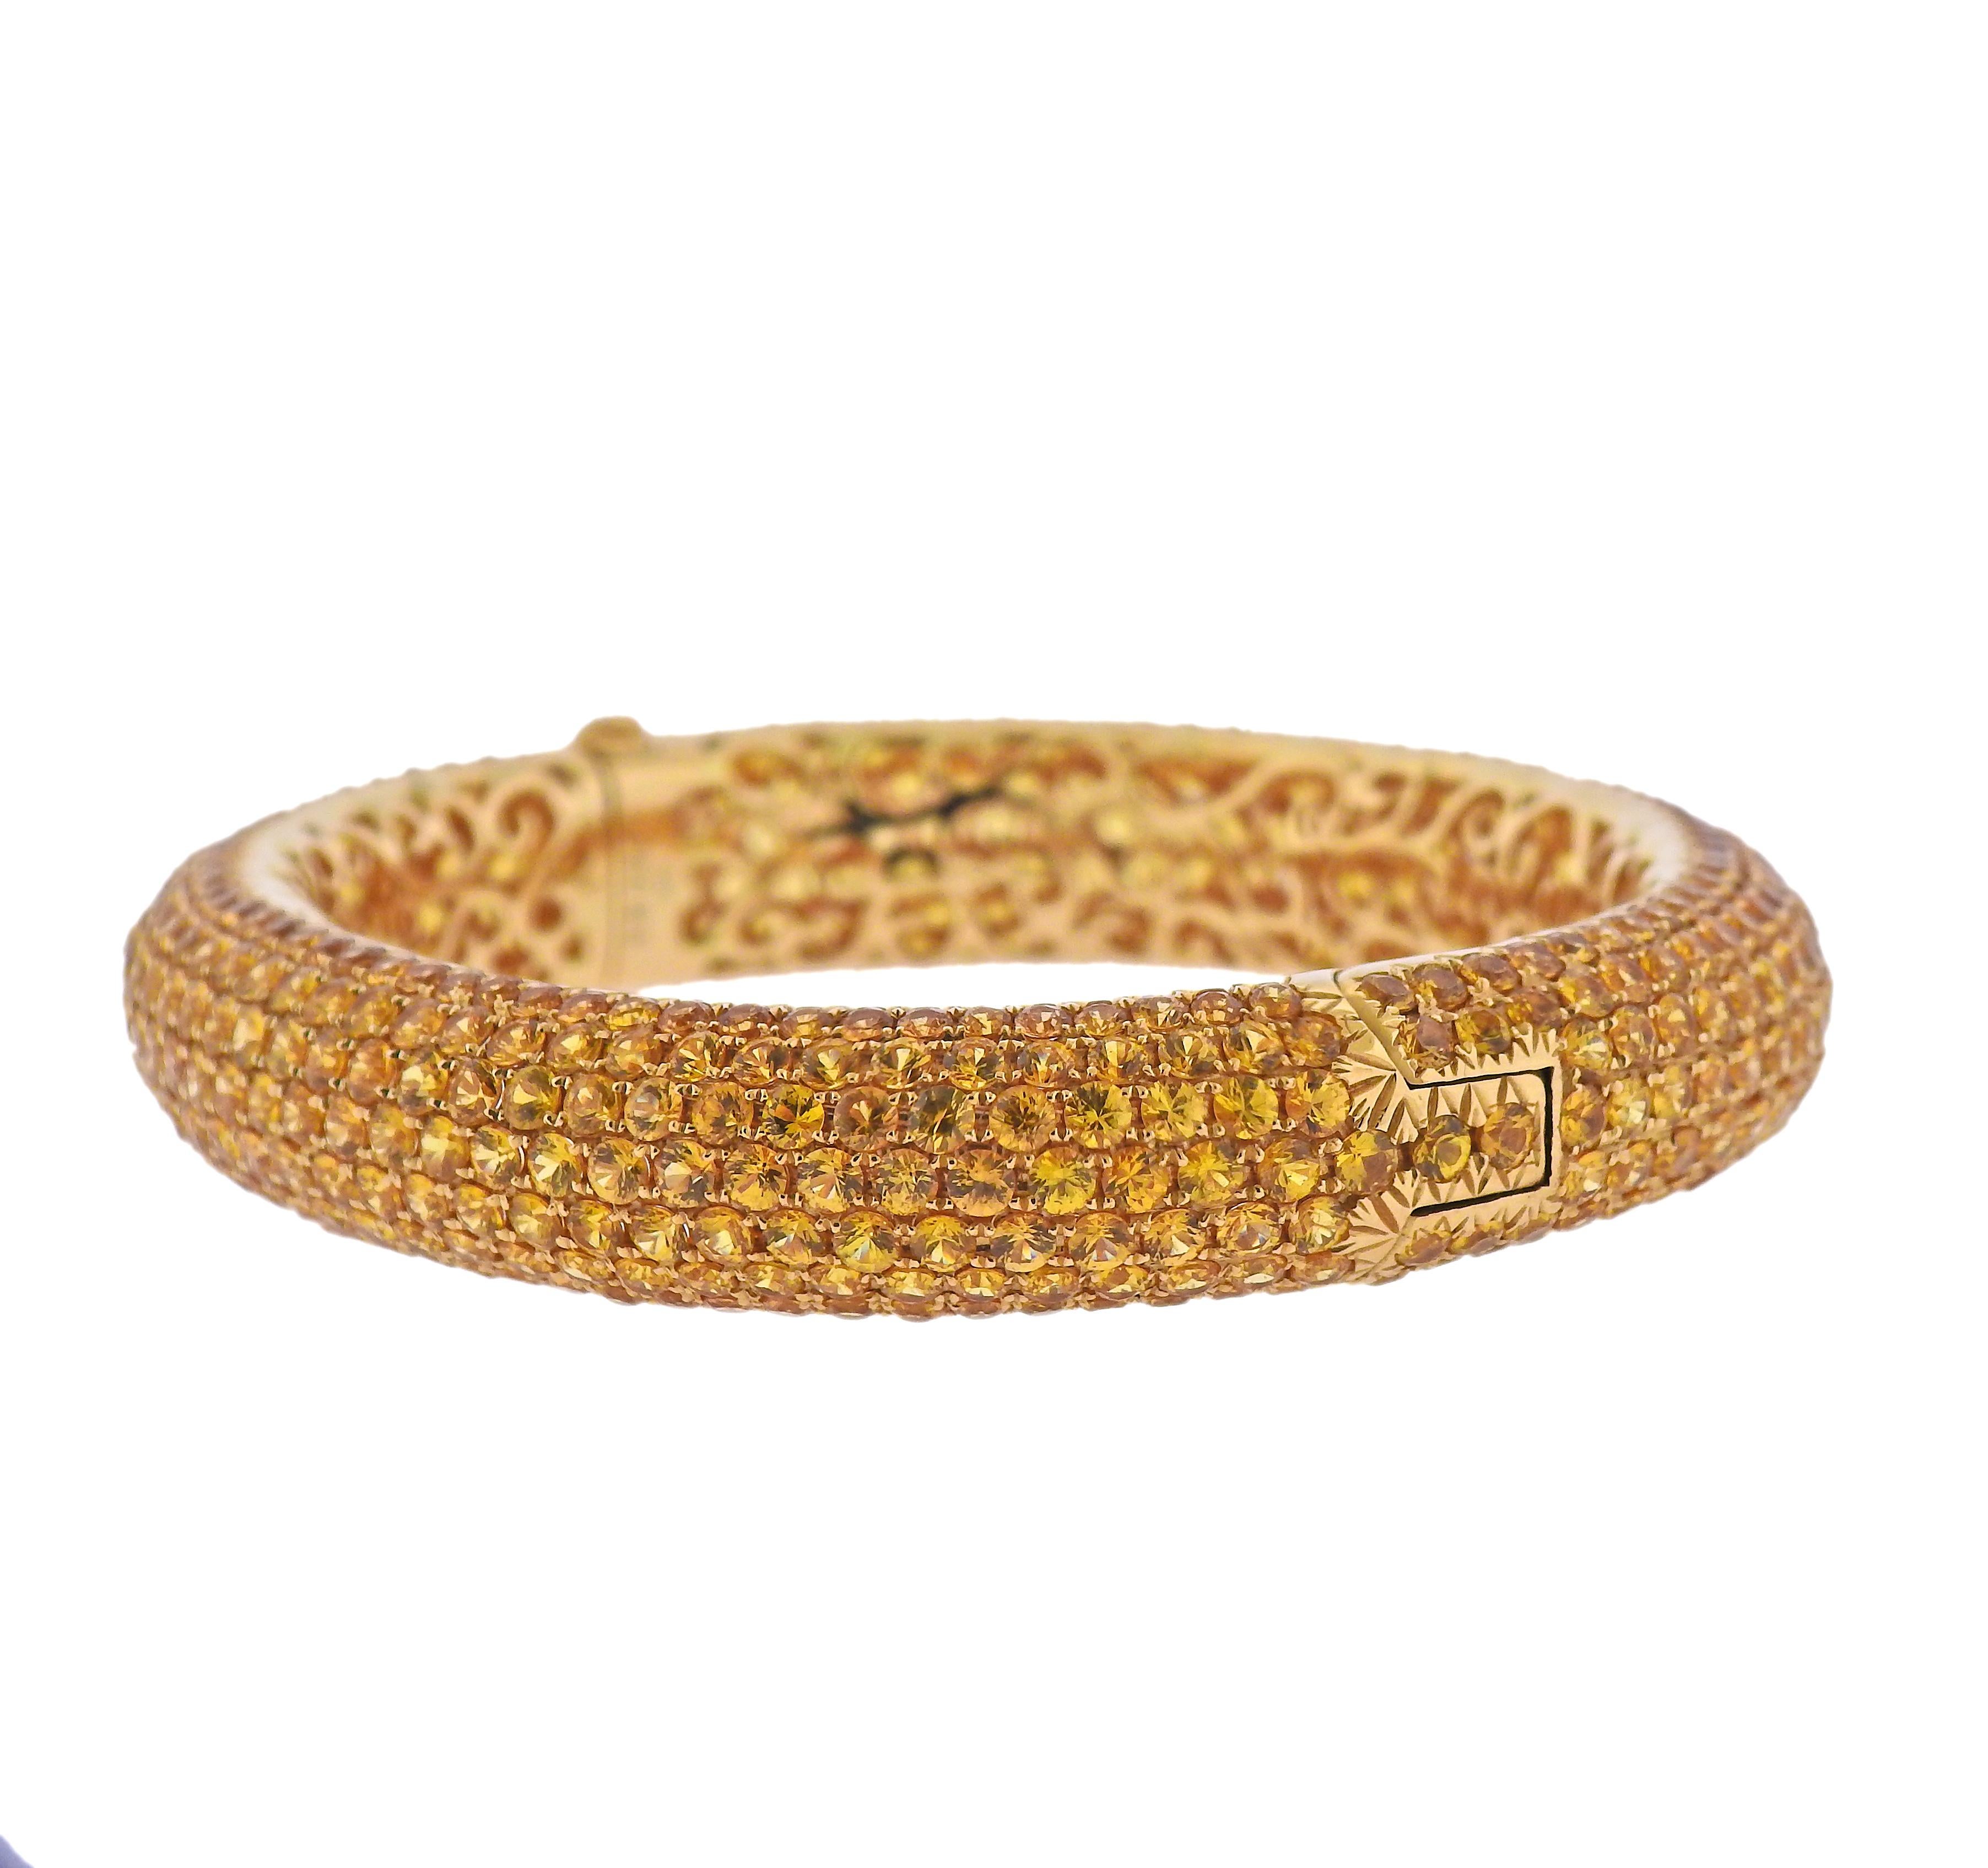 18k gold bangle bracelet, decorate with 38.77 carats in yellow sapphires. Bracelet will fit up to 7.5